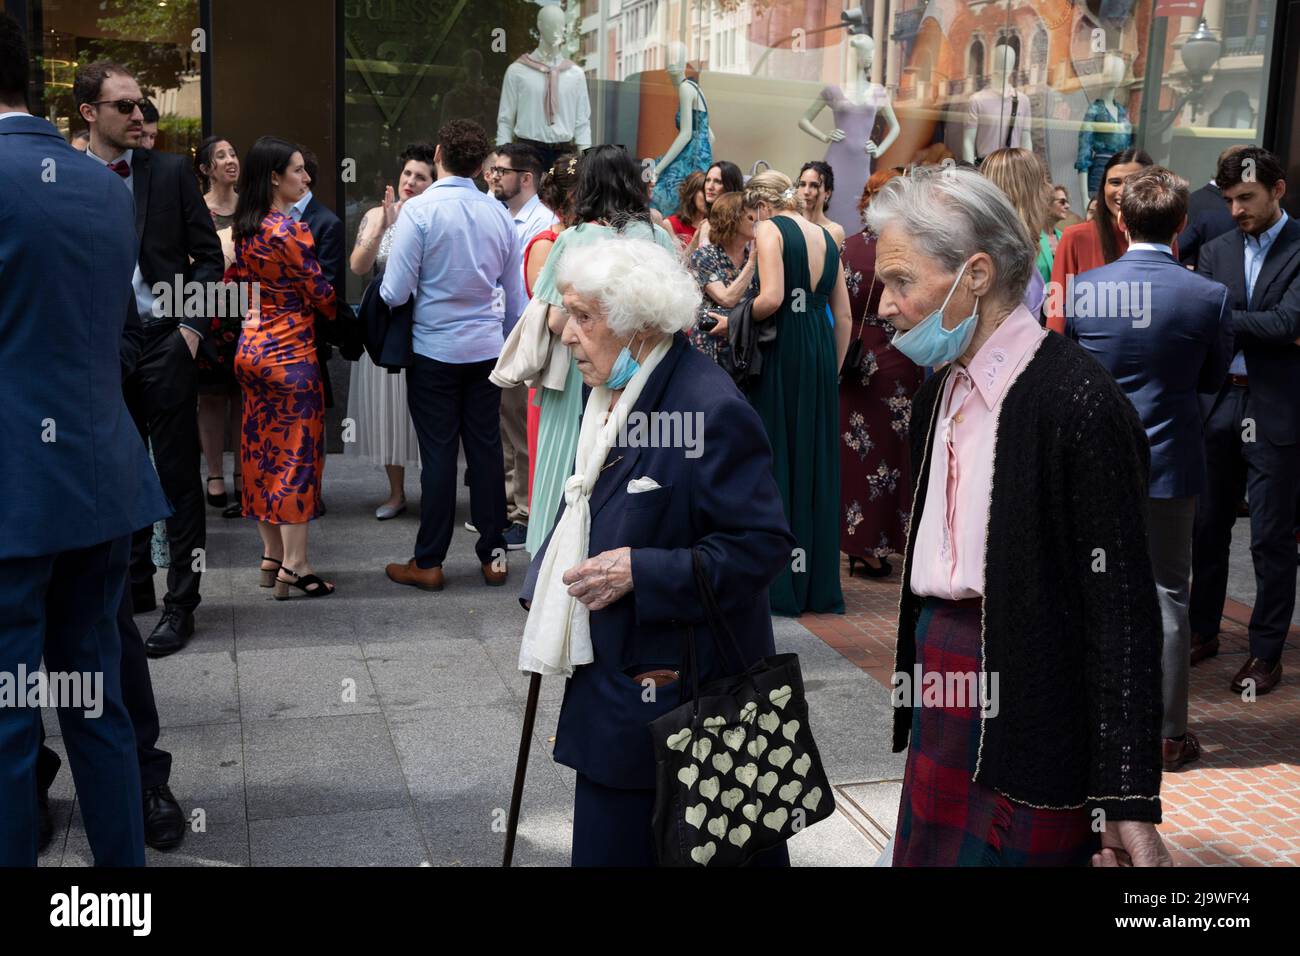 Elderly Spanish women walk past guests of a wedding outside a clothing retailer on 'Gran via Don Diego Lopez de Haro' in central Bilbao, on 21st May 2022, in Bilbao, Cantabria, Spain. Stock Photo